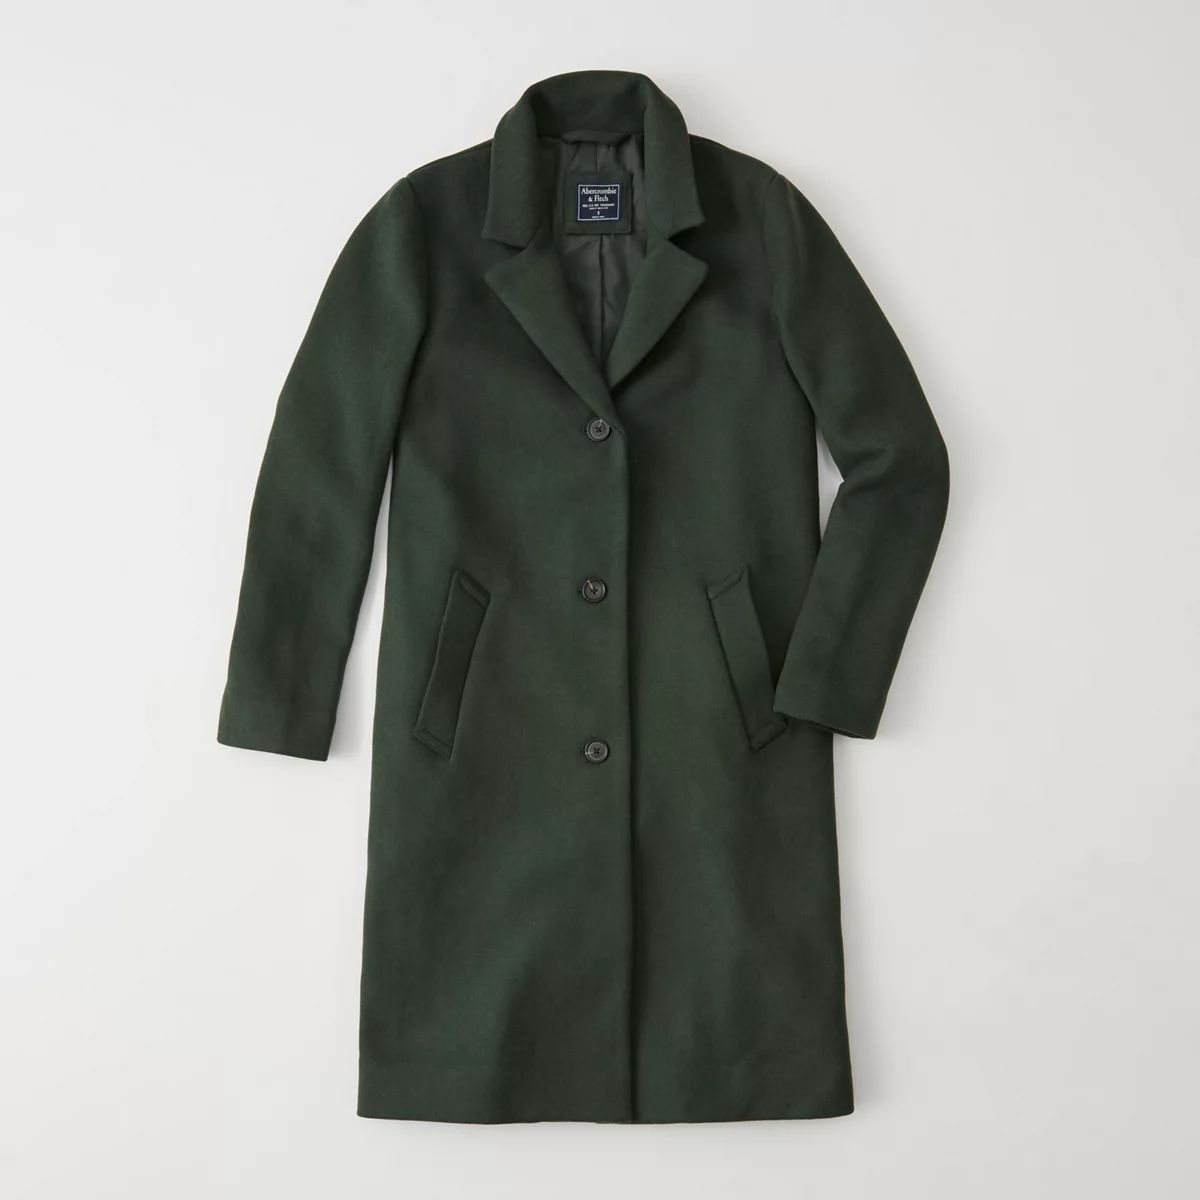 The A&F Dad Coat | Abercrombie & Fitch US & UK